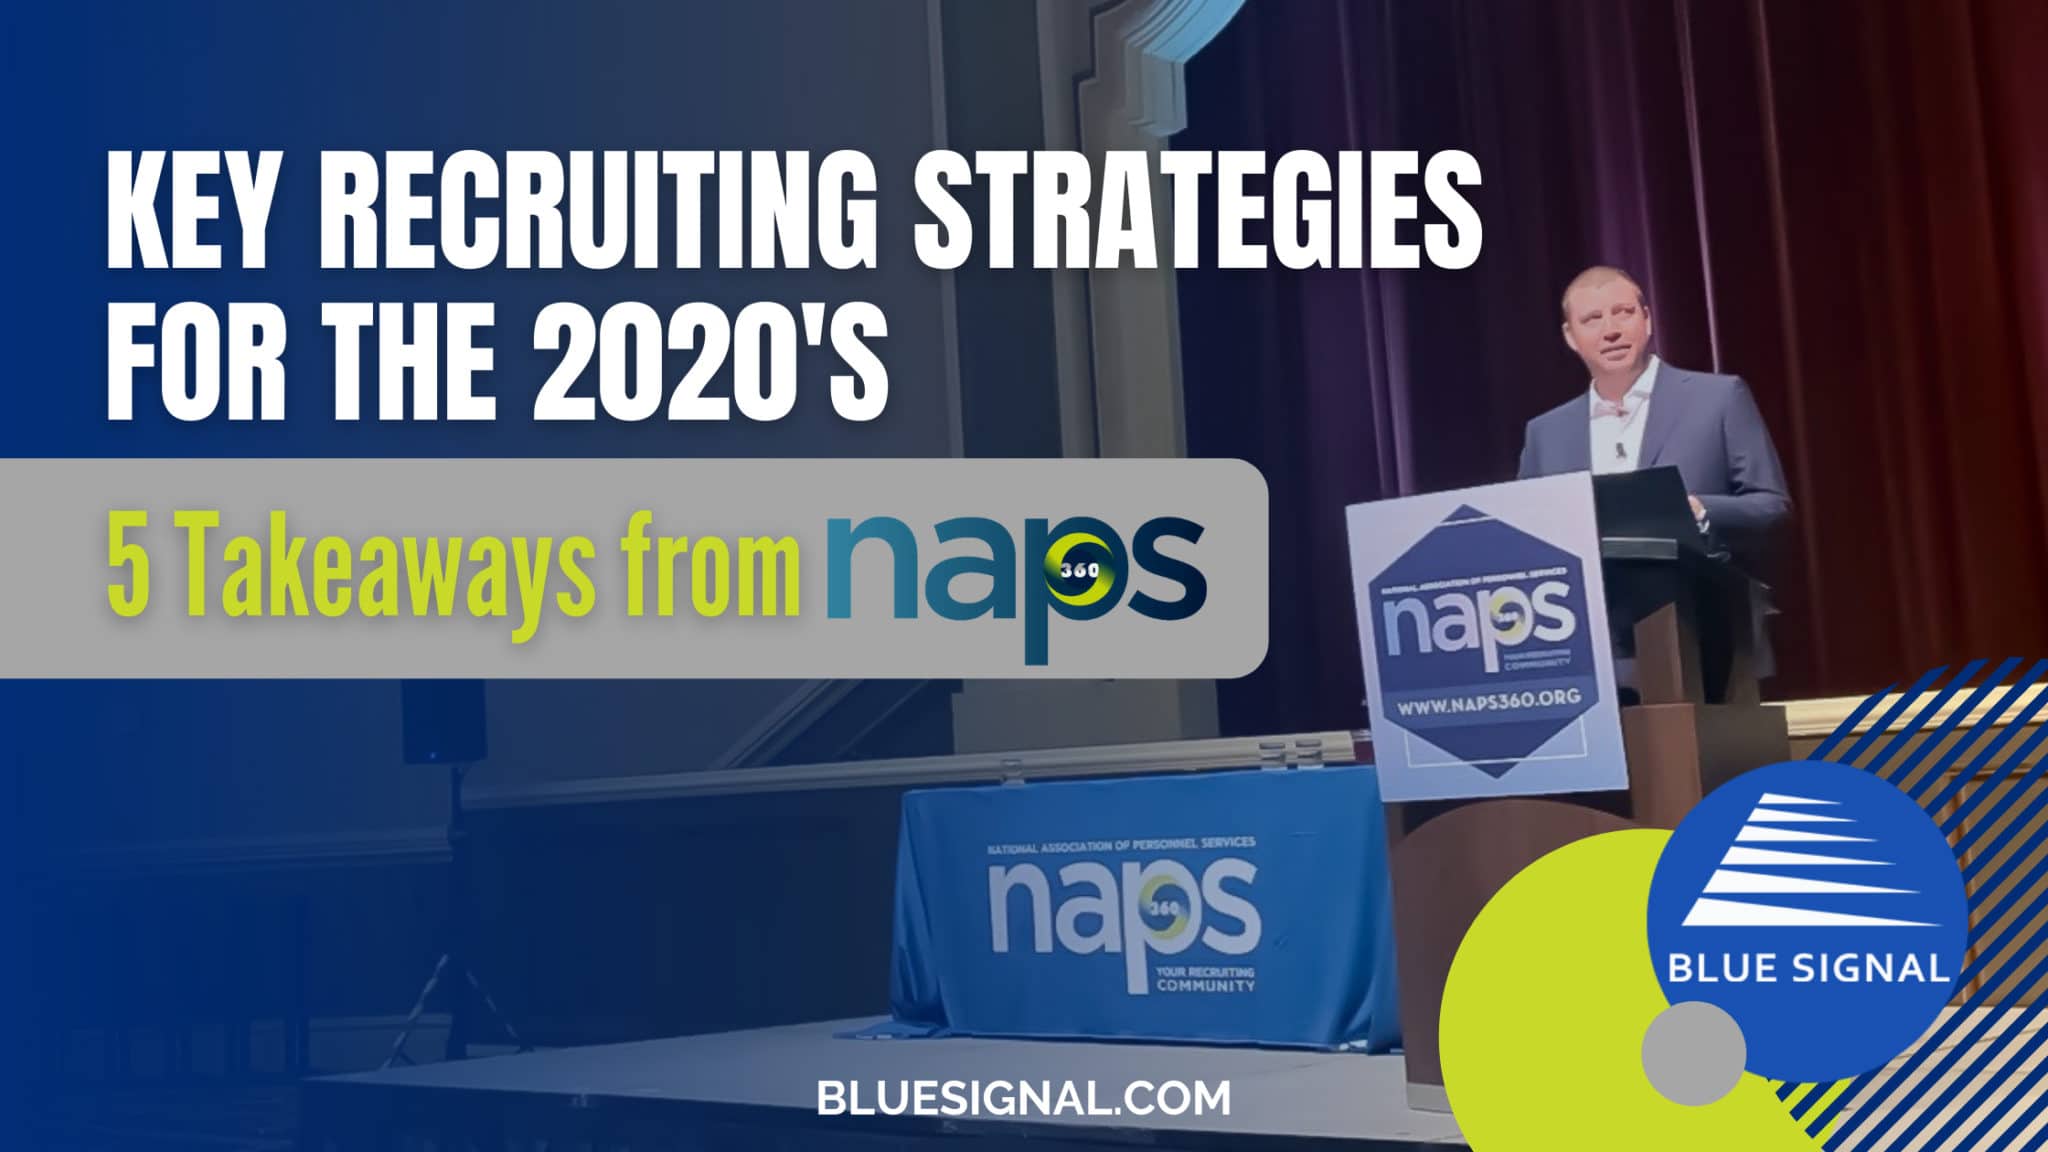 Key Recruiting Strategies for the 2020's: 5 Takeaways from NAPS